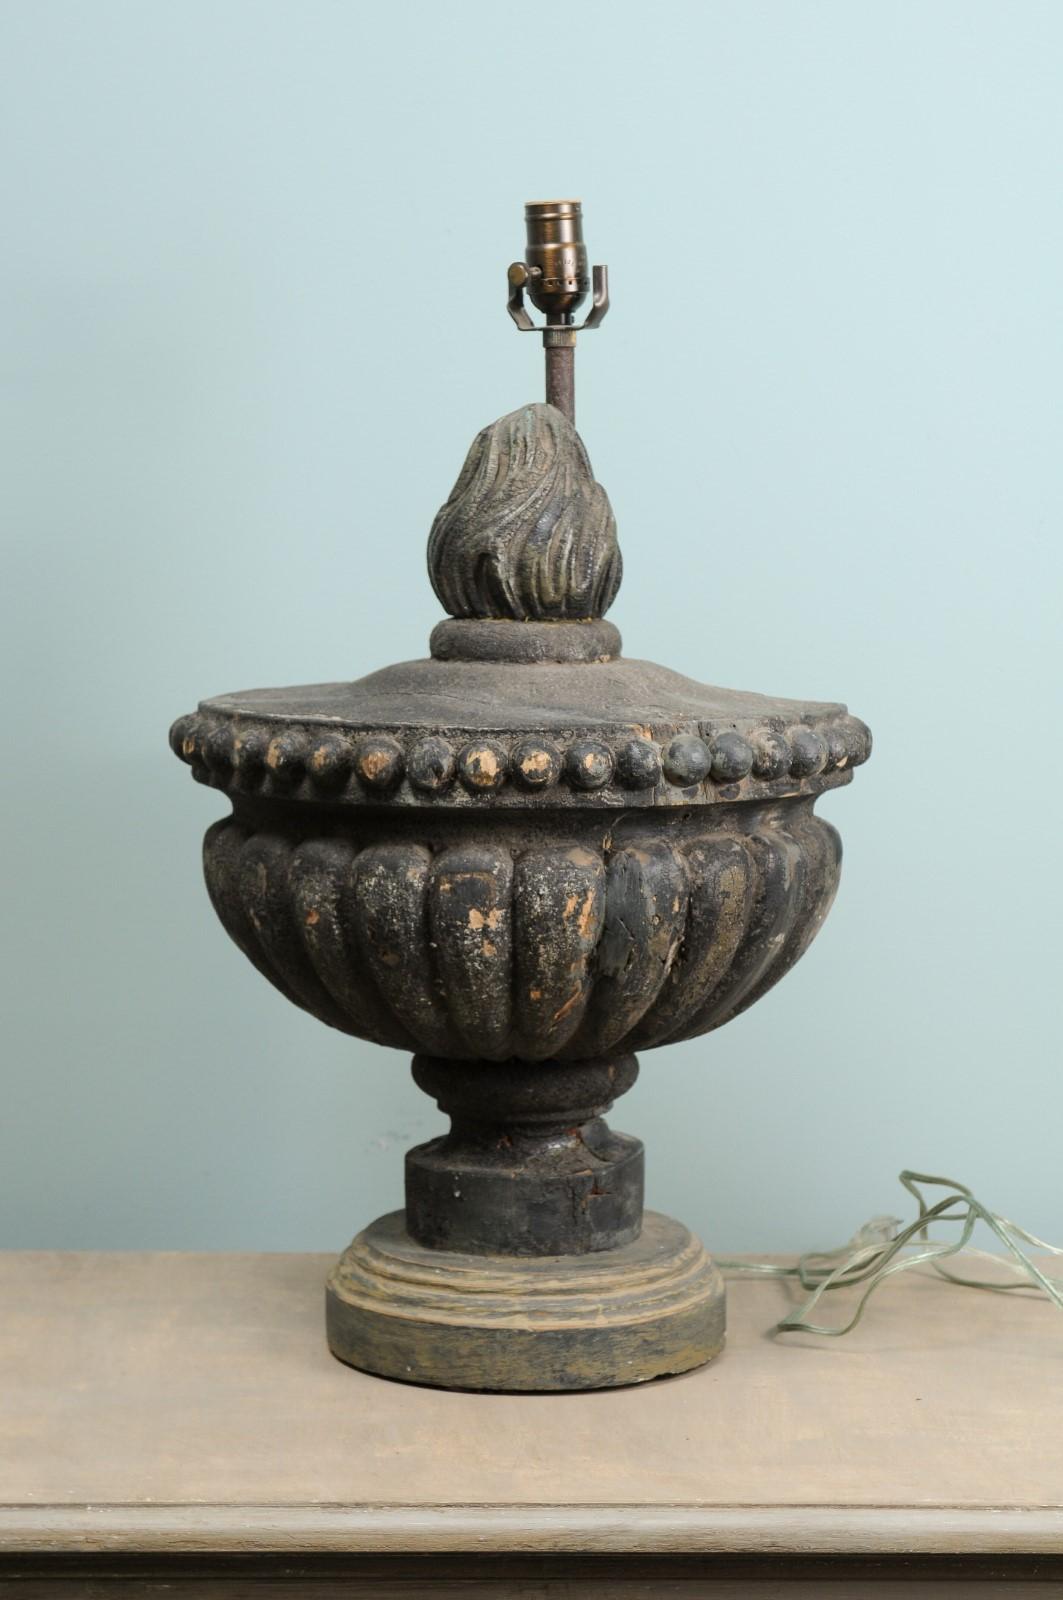 A custom single table lamp of an Italian early 19th century carved-wood fragment. This Italian fragment lamp features a carved wood urn with flame at top, which has been raised on a rounded base and lamp post mounted along it's backside. The